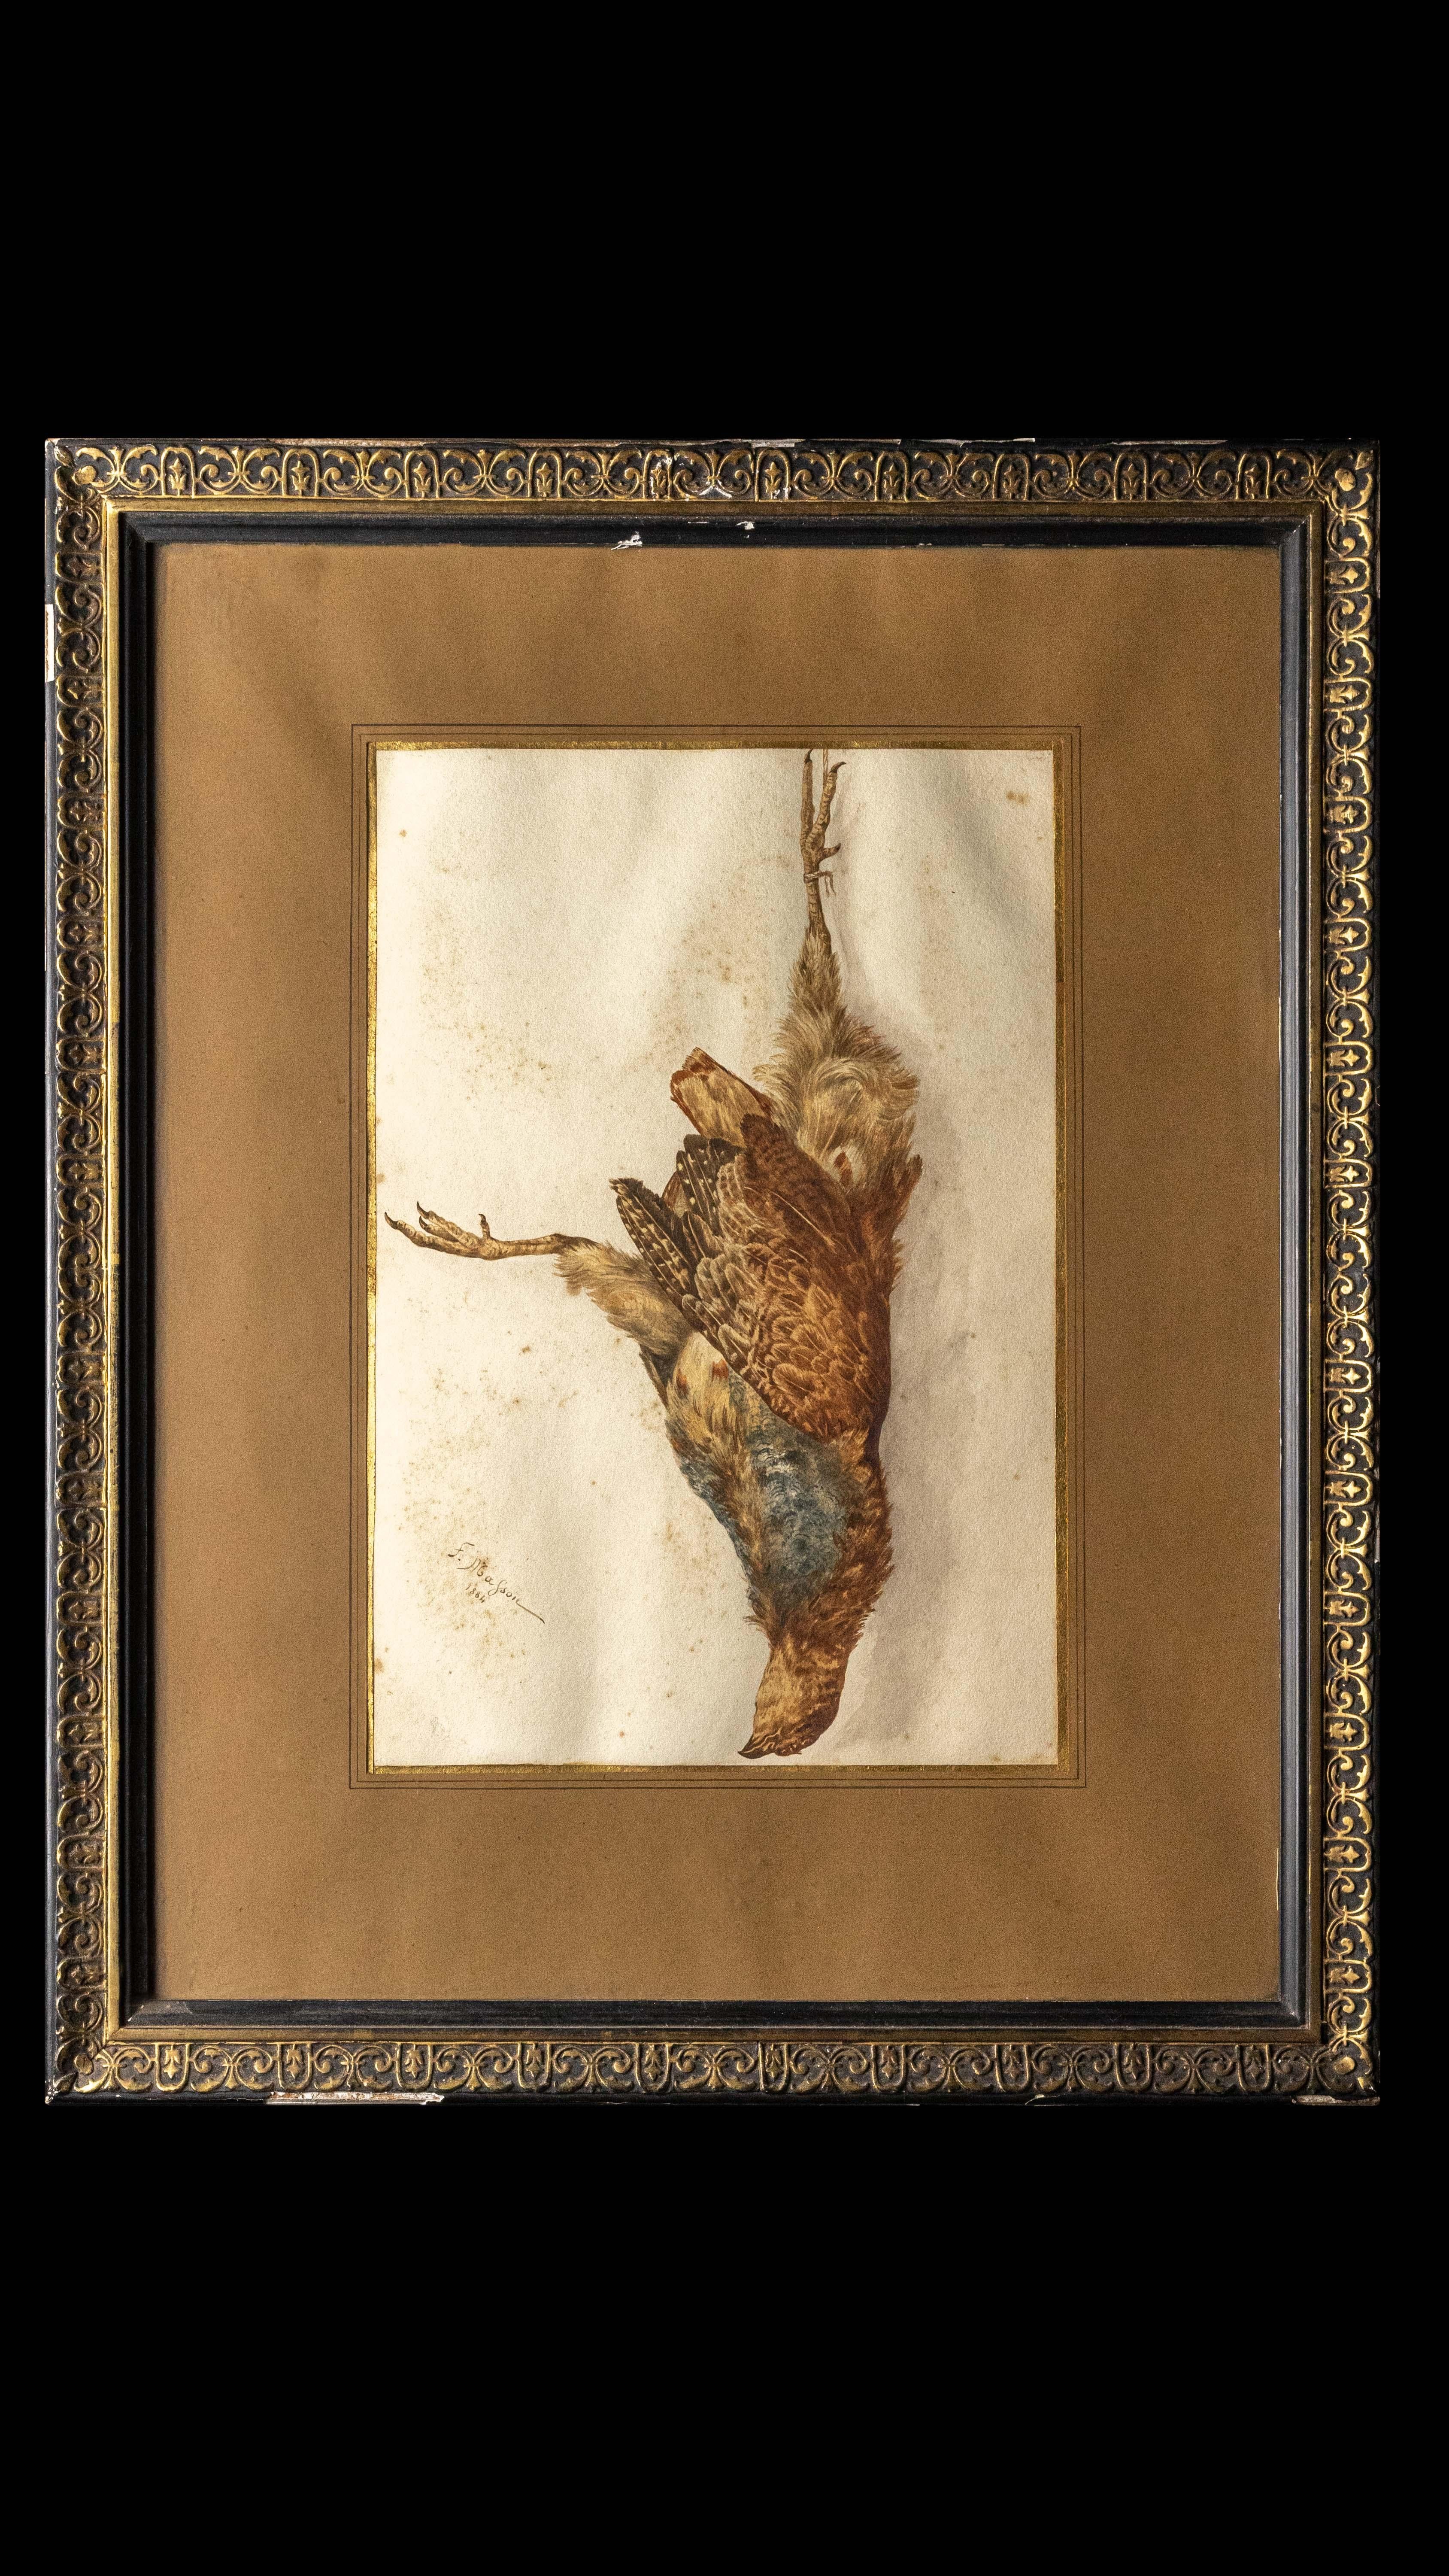 Framed 19th C Gouche of a Deceased Bird Signed Frederic Masson:

Measures: 16.5